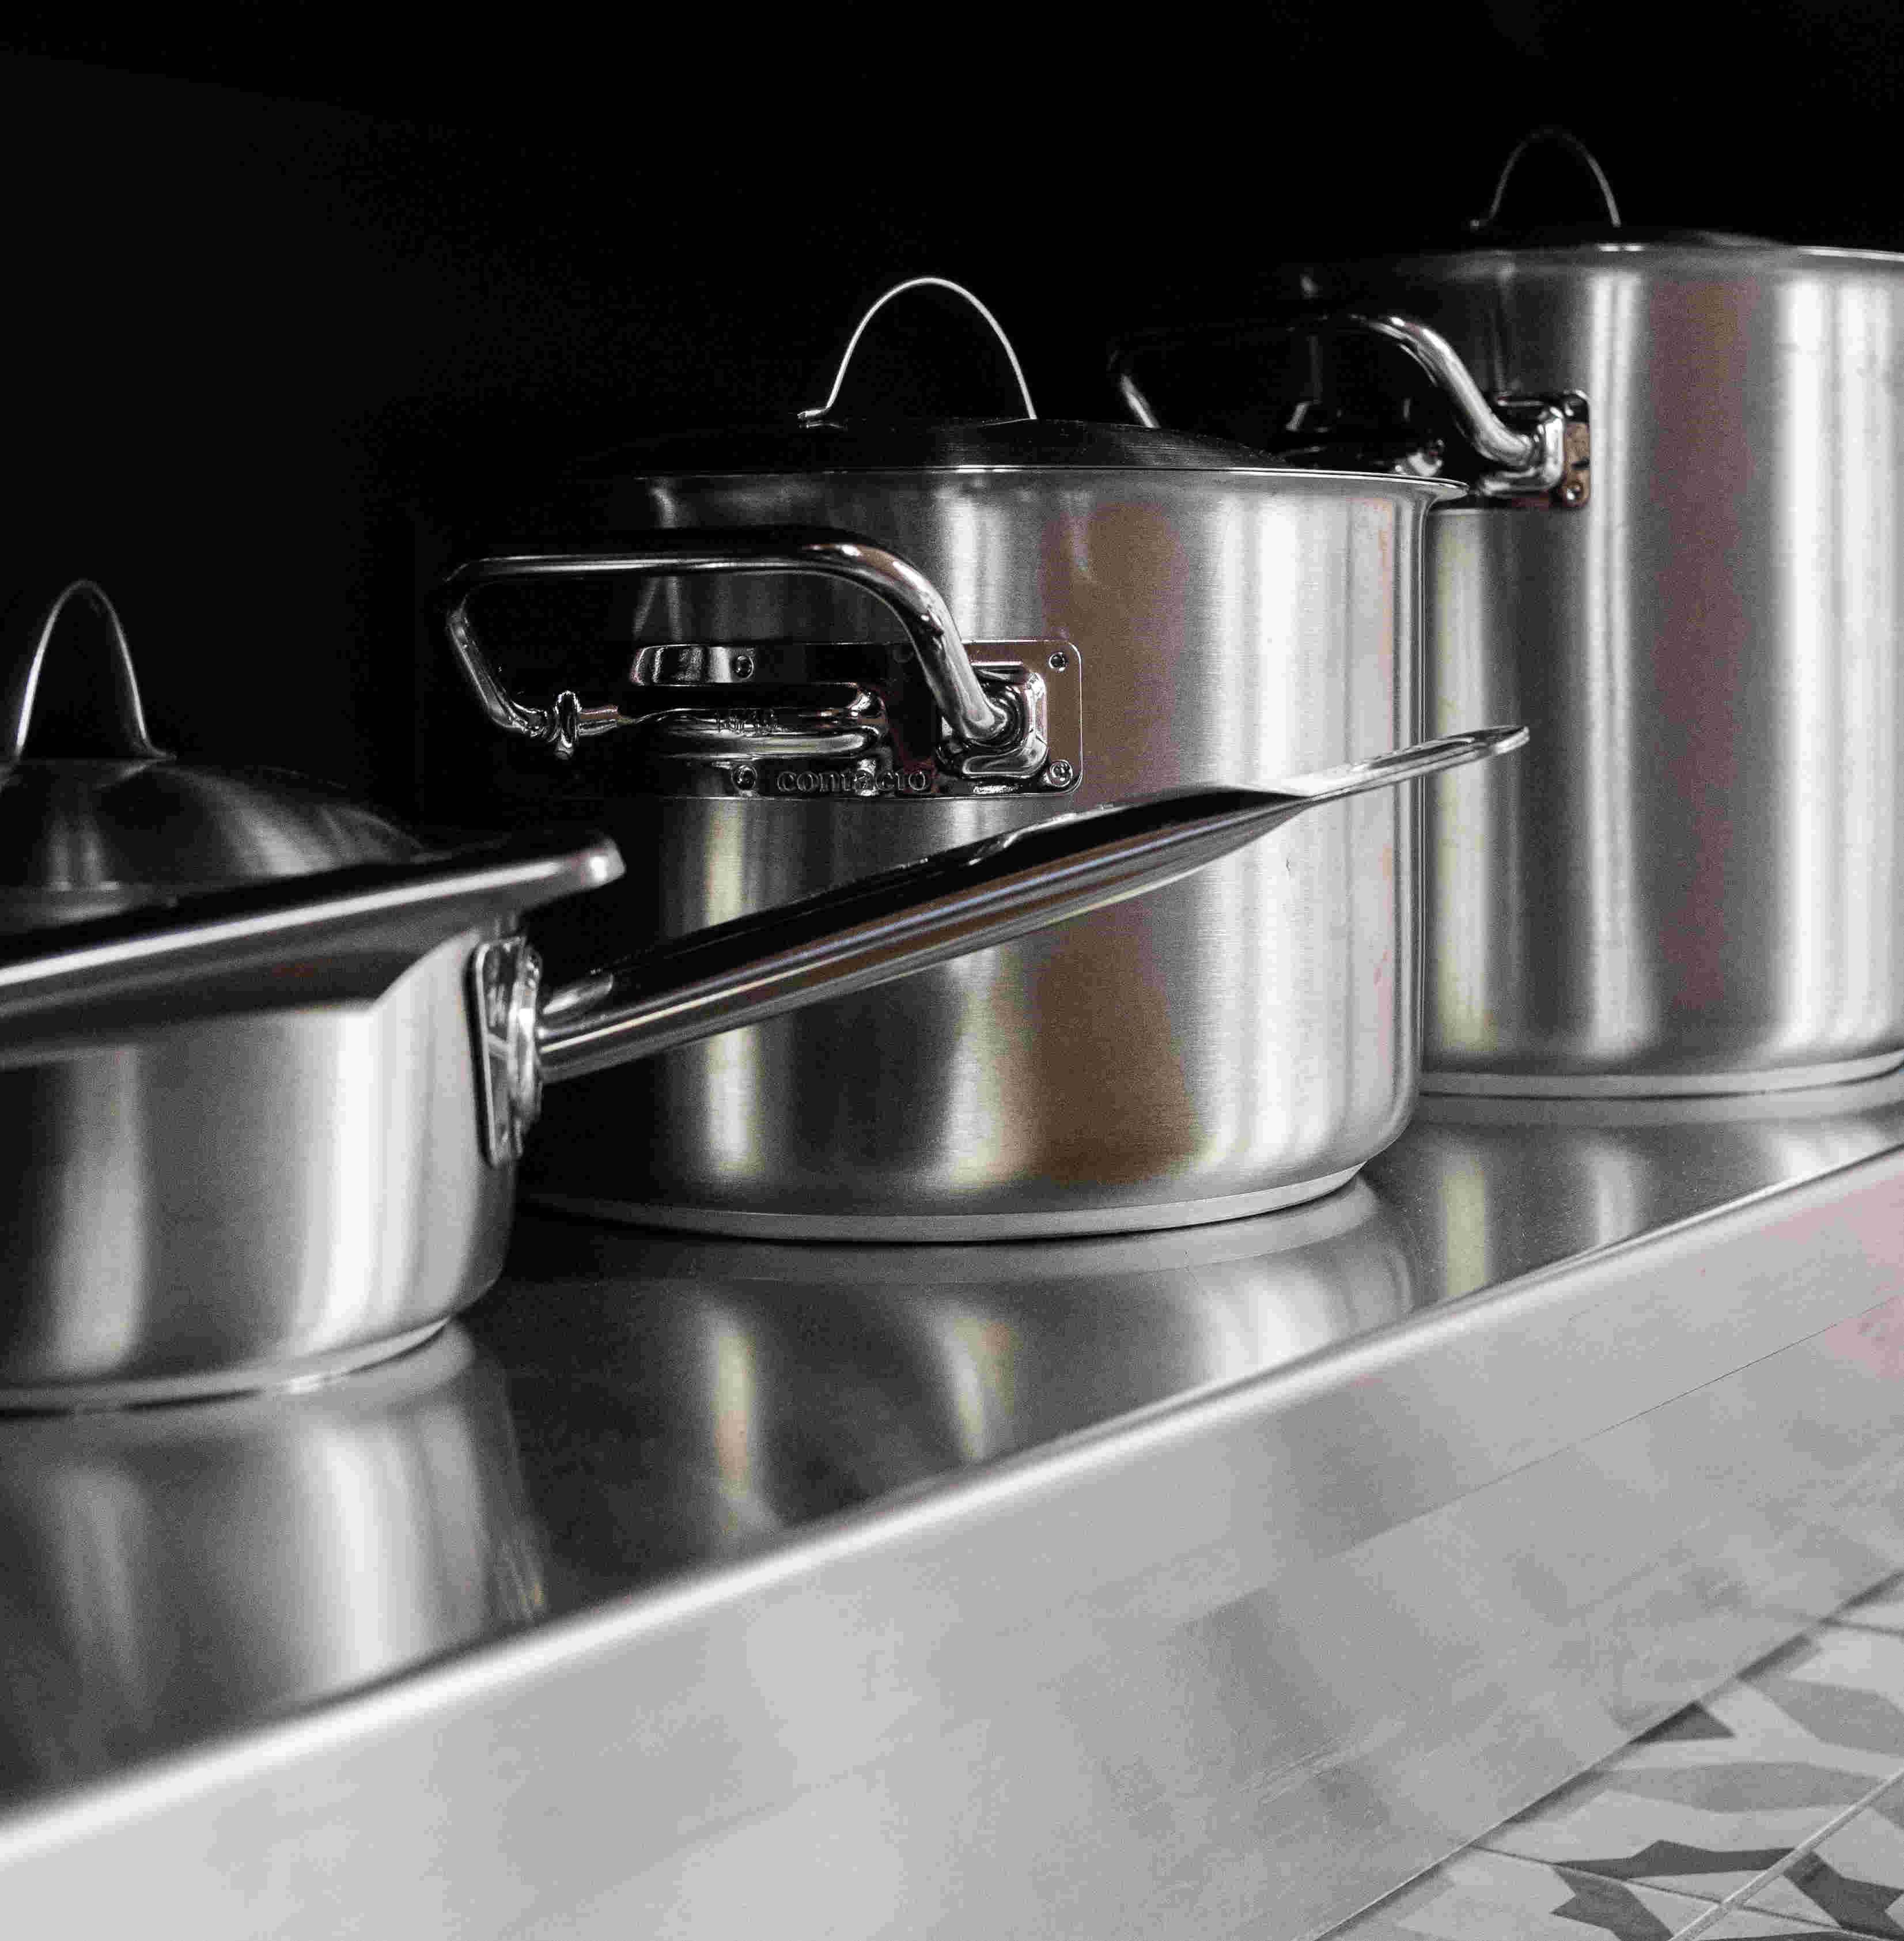 stainless steel saucepans on a stainless steel shelf